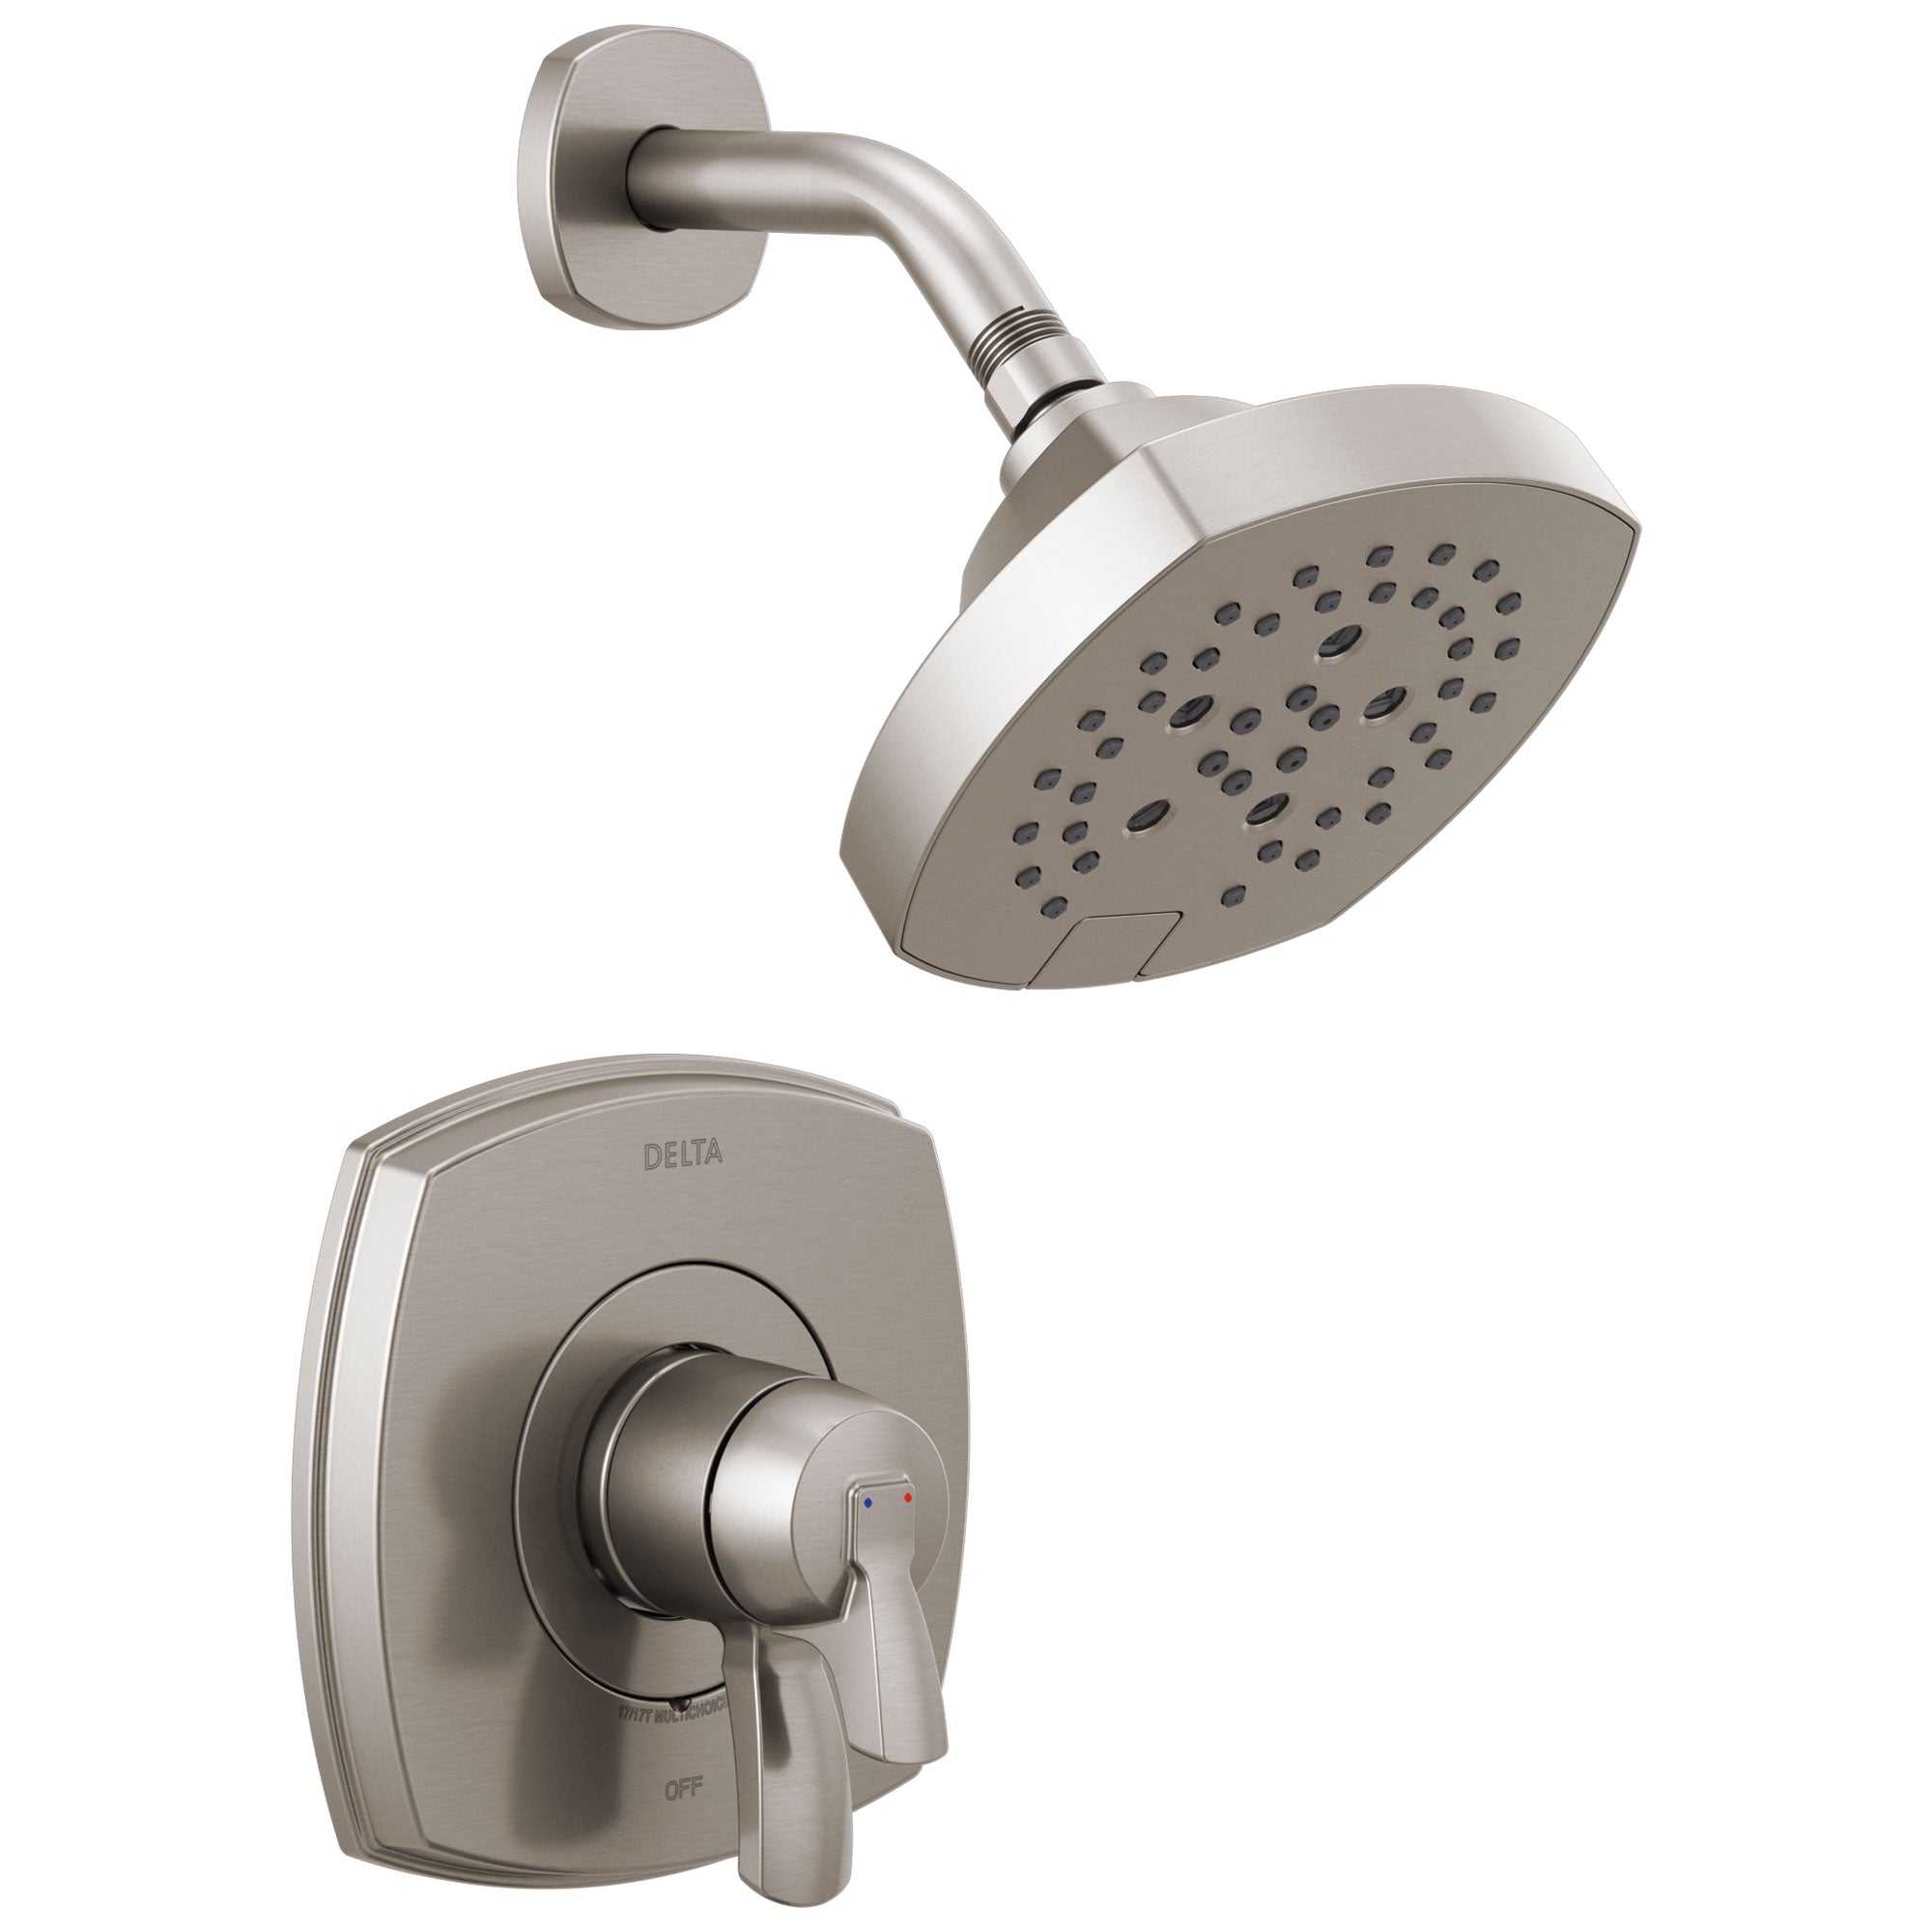 Delta Stryke Stainless Steel Finish 17 Series Shower Only Faucet Trim Kit (Requires Valve) DT17276SS